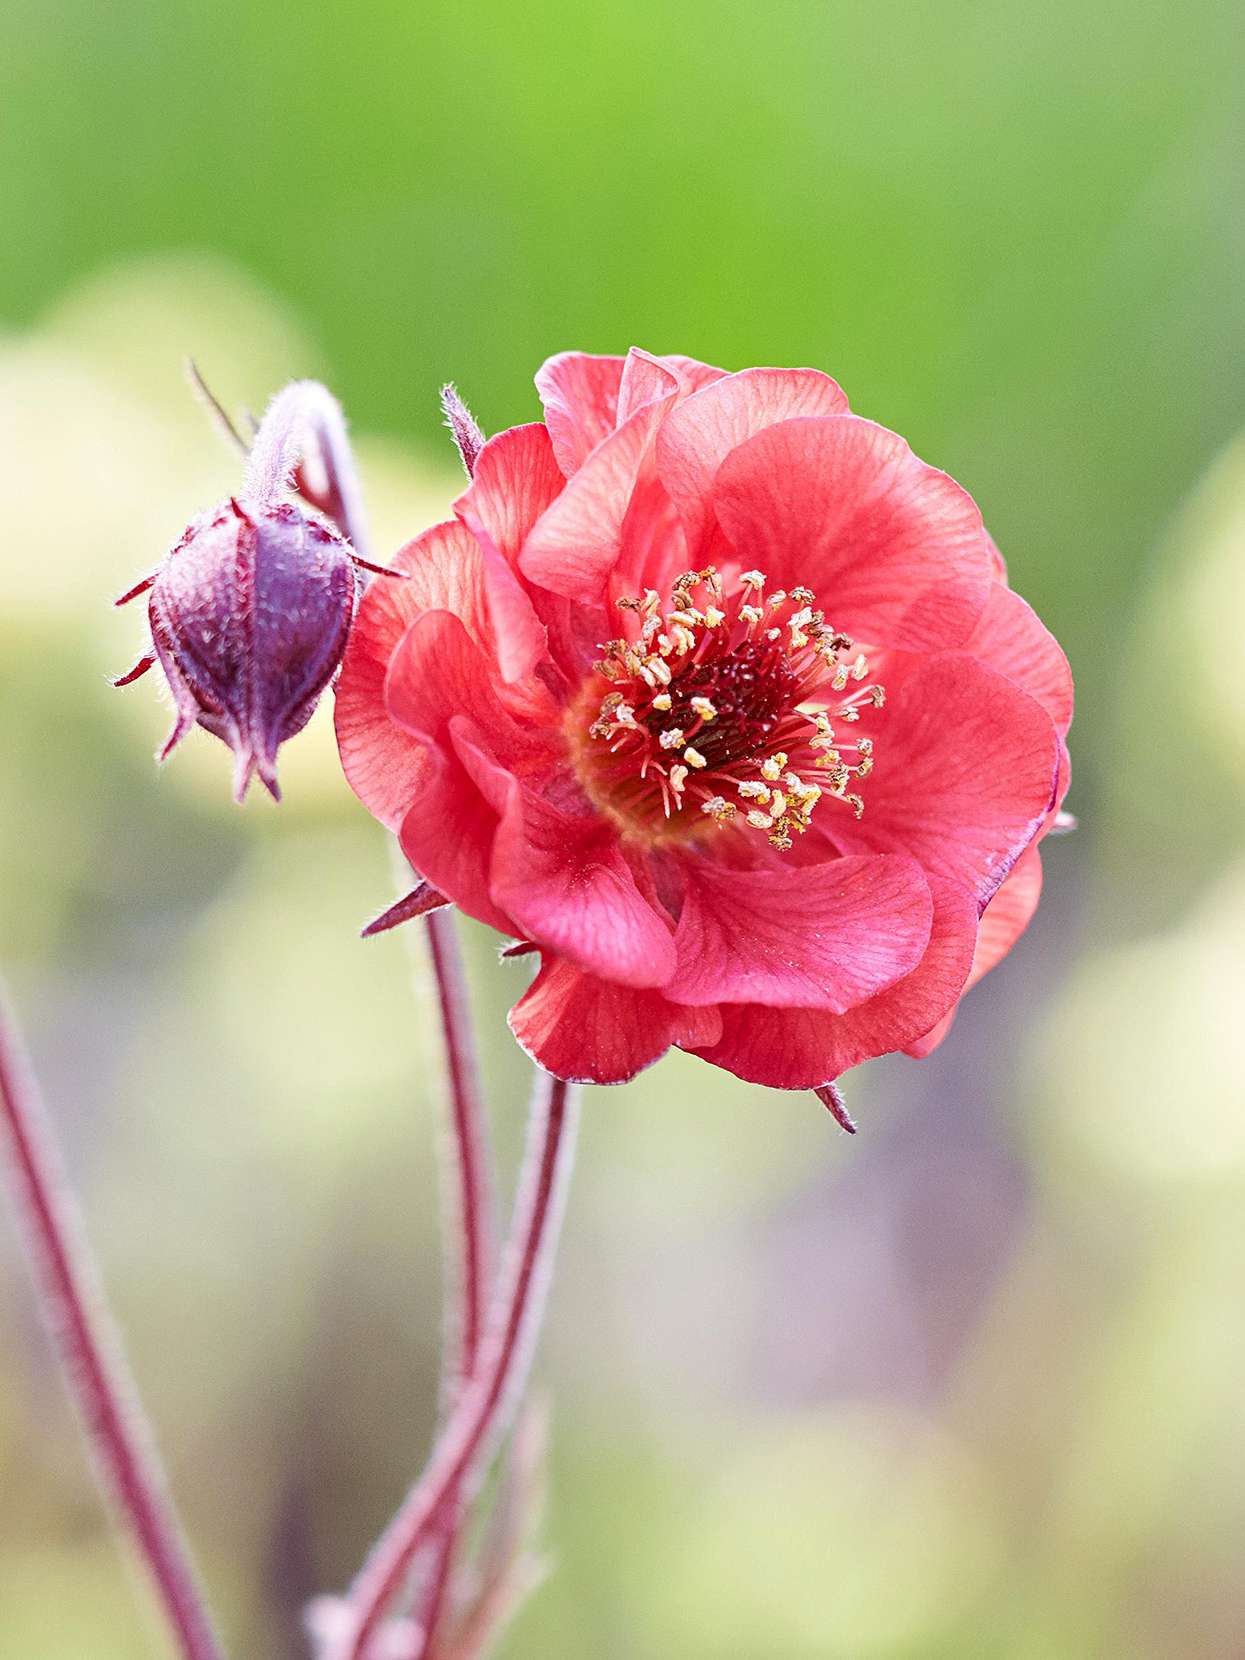 avens 'Red Wings' geum with red semidouble flowers